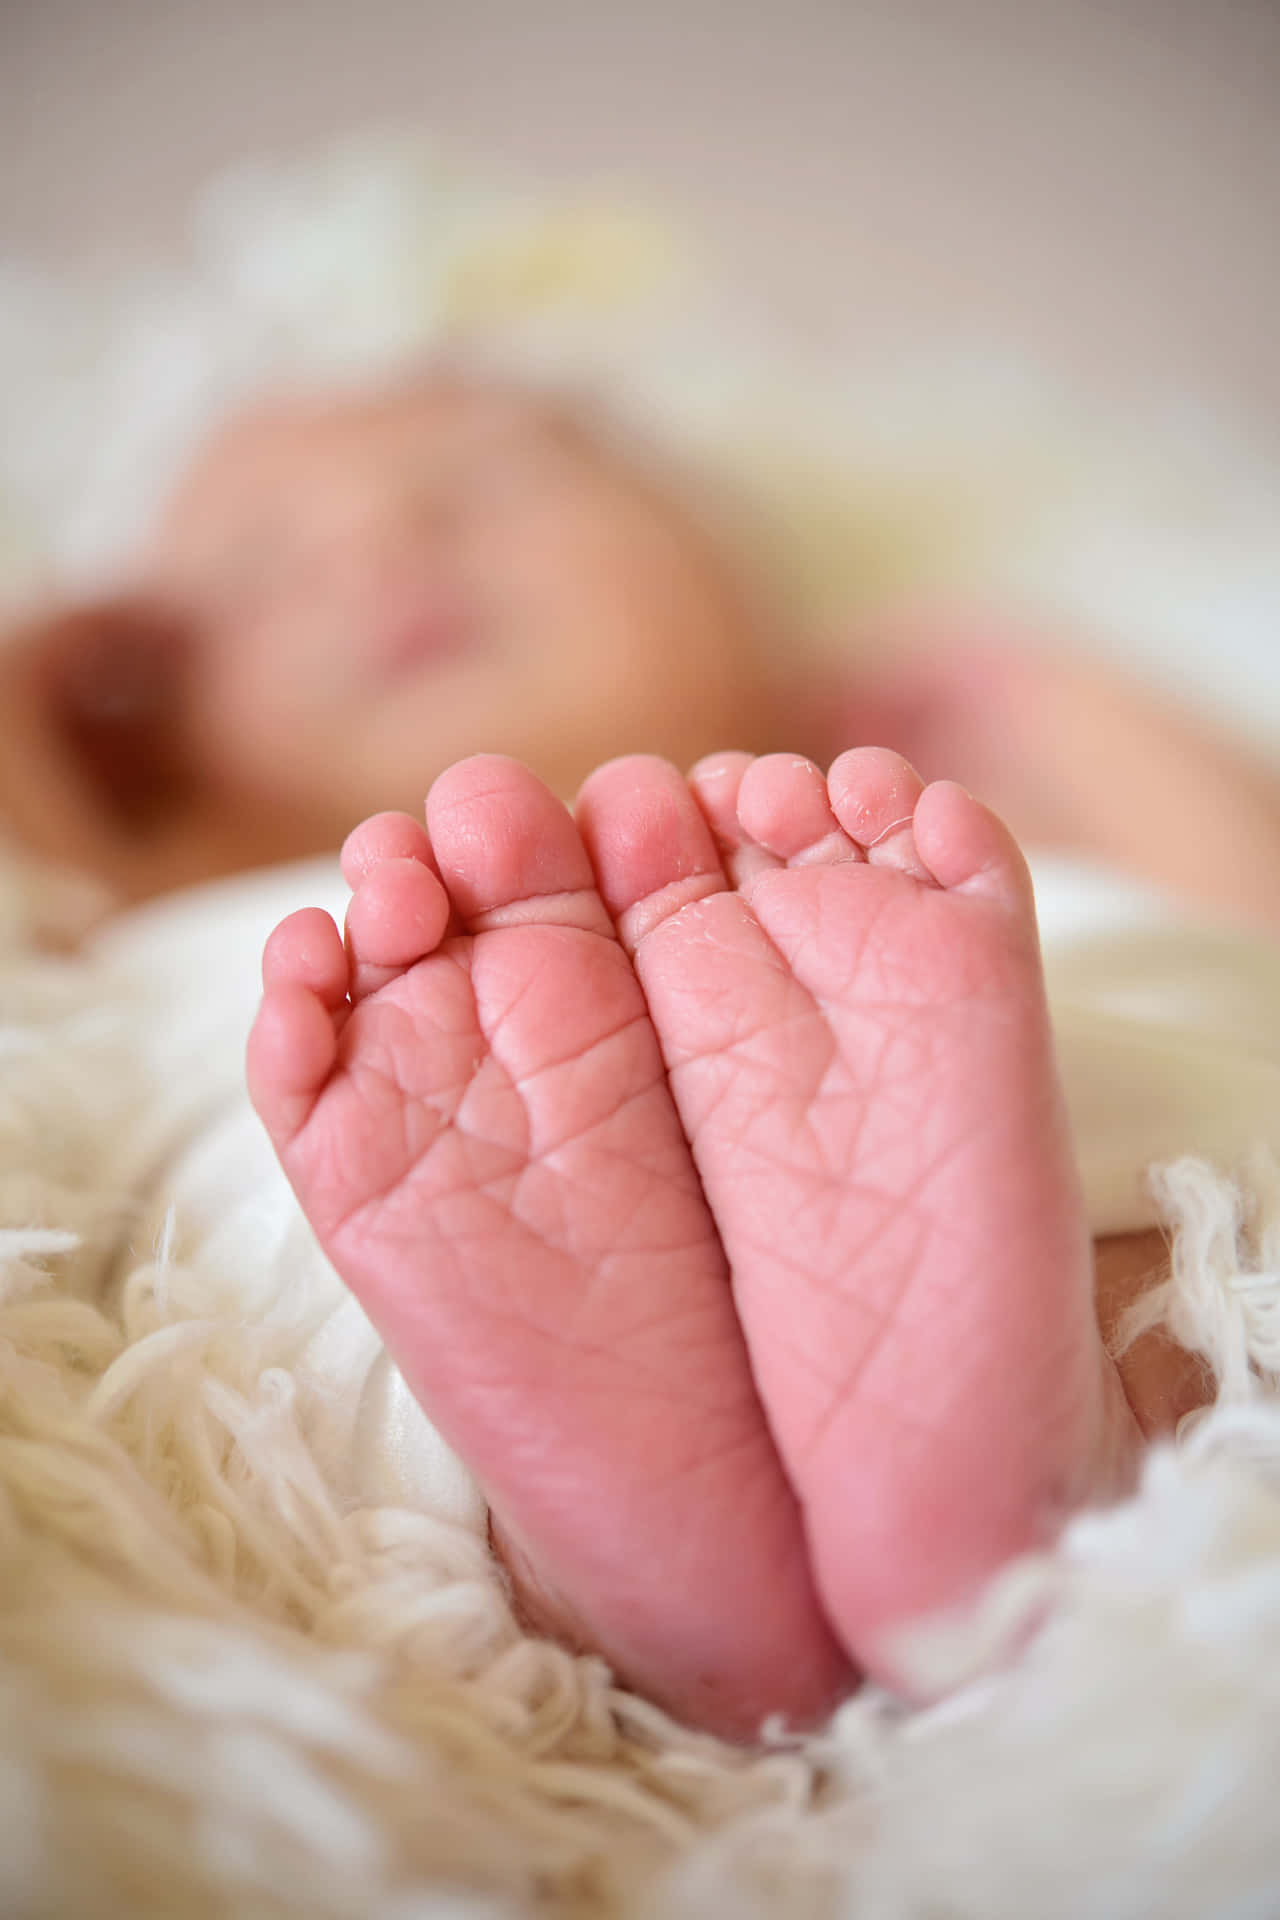 A Newborn Baby's Feet Are Laying On A White Blanket